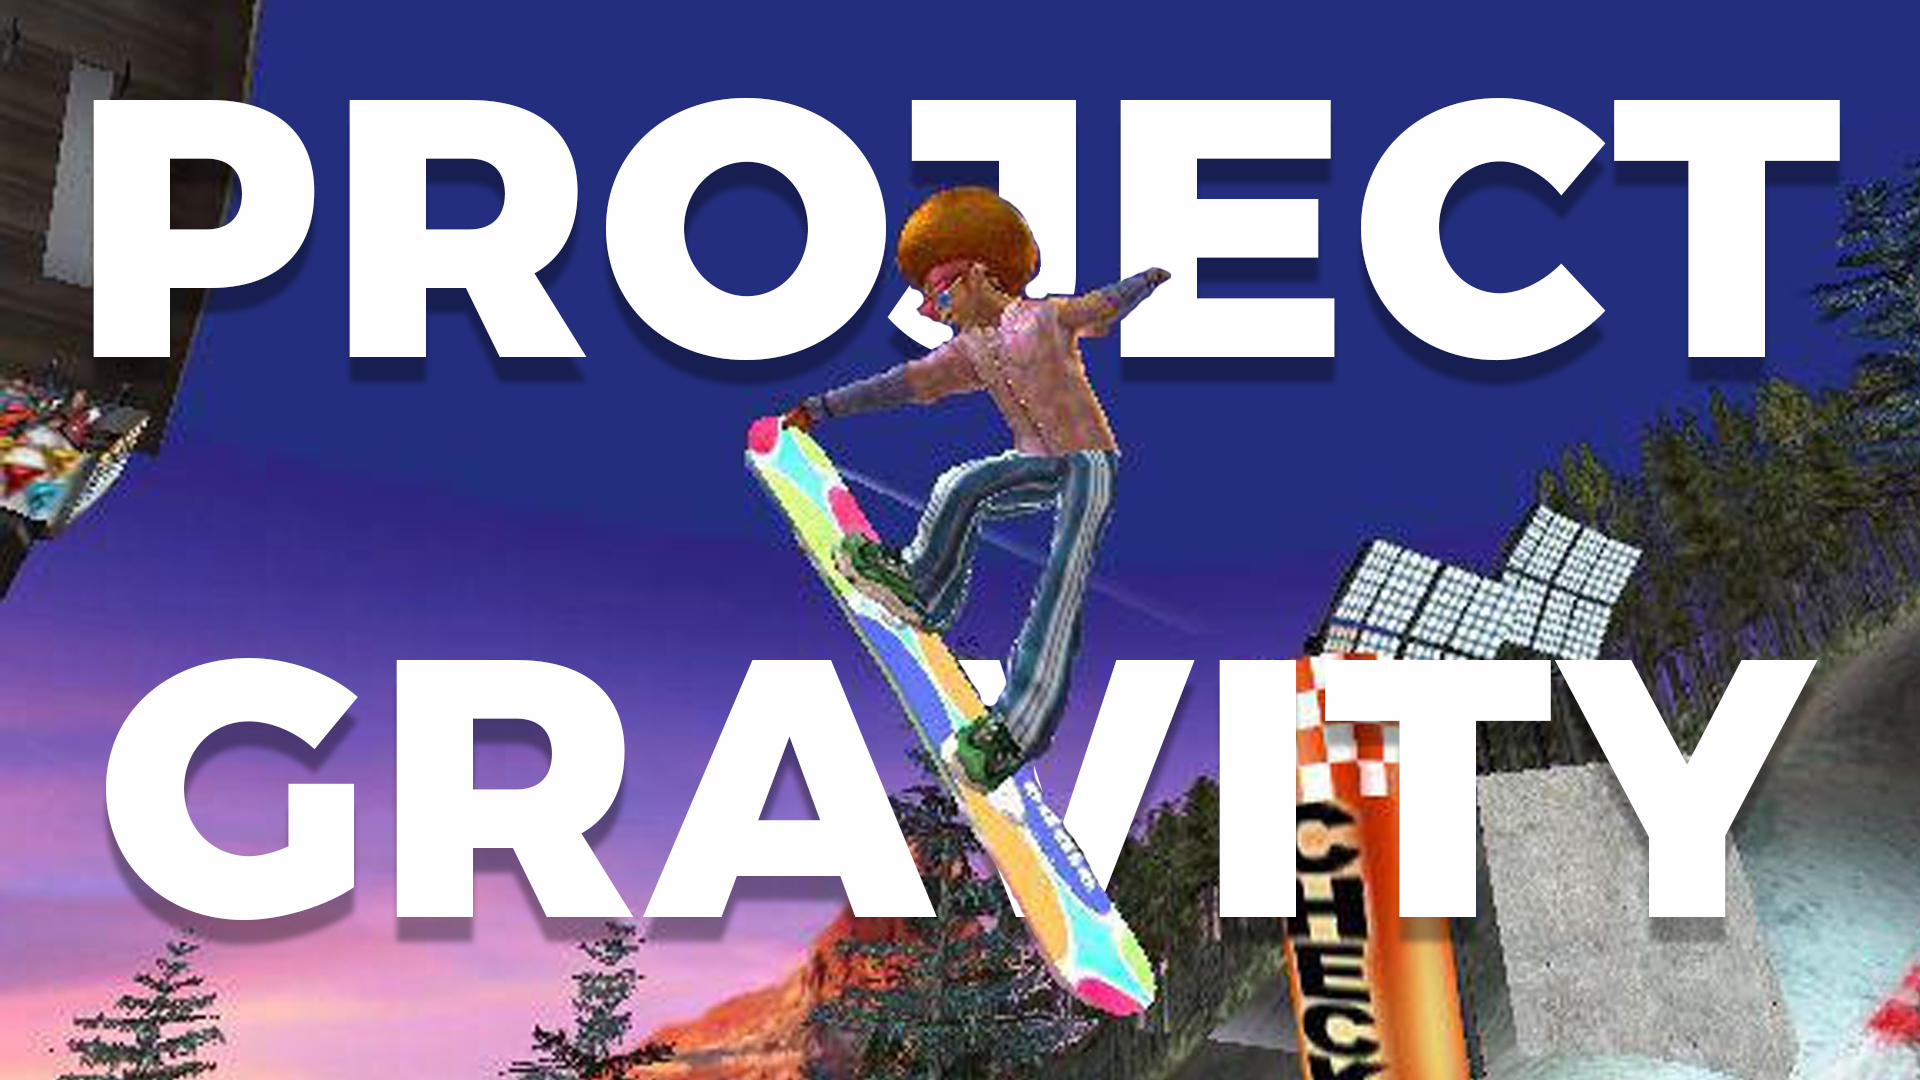 Project Gravity - a new snowboarding game from the creator of SSX